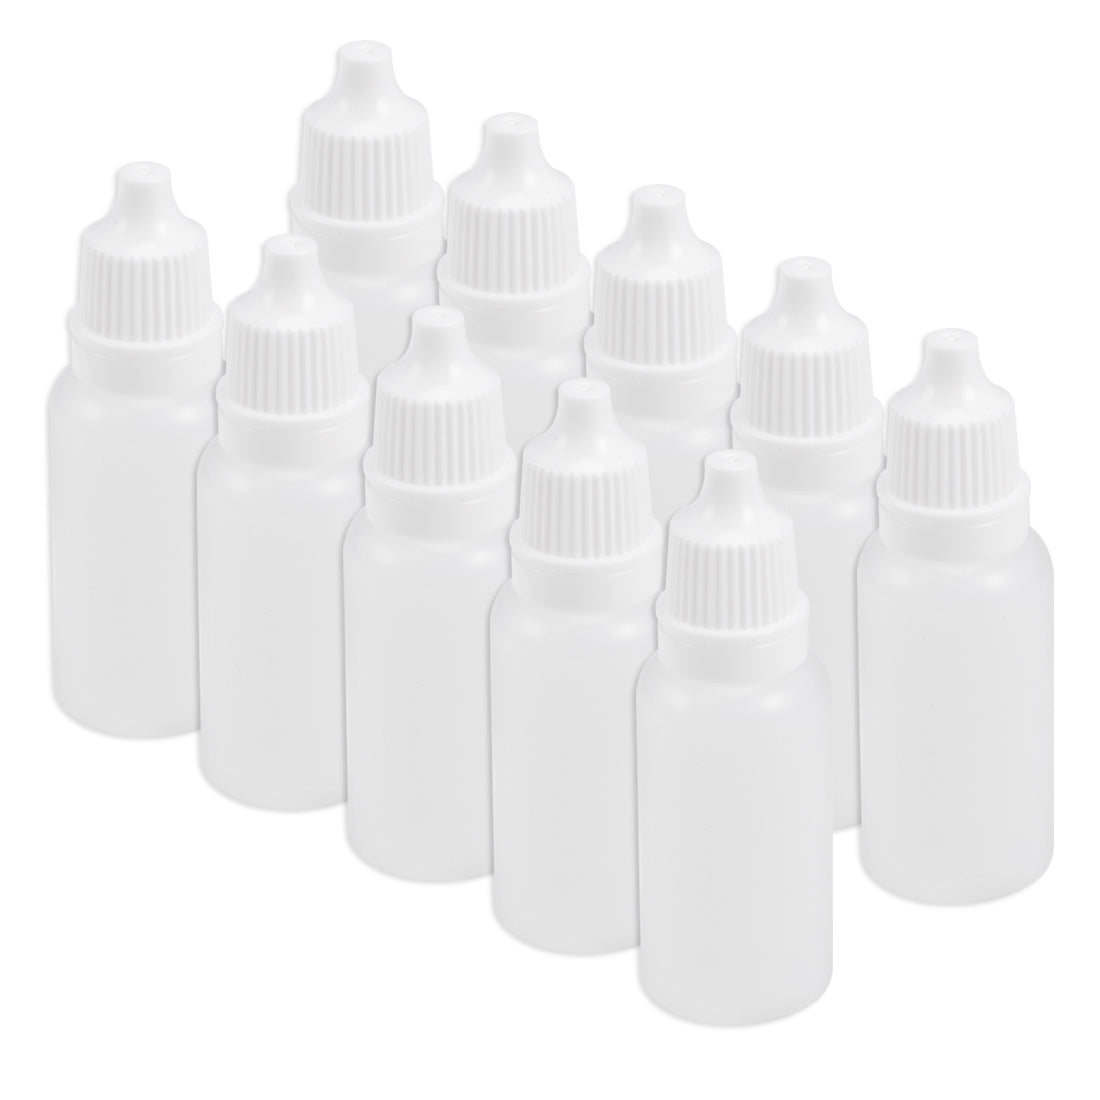 uxcell Uxcell 15ml/0.5 oz Empty Squeezable Dropper Bottle 10pcs